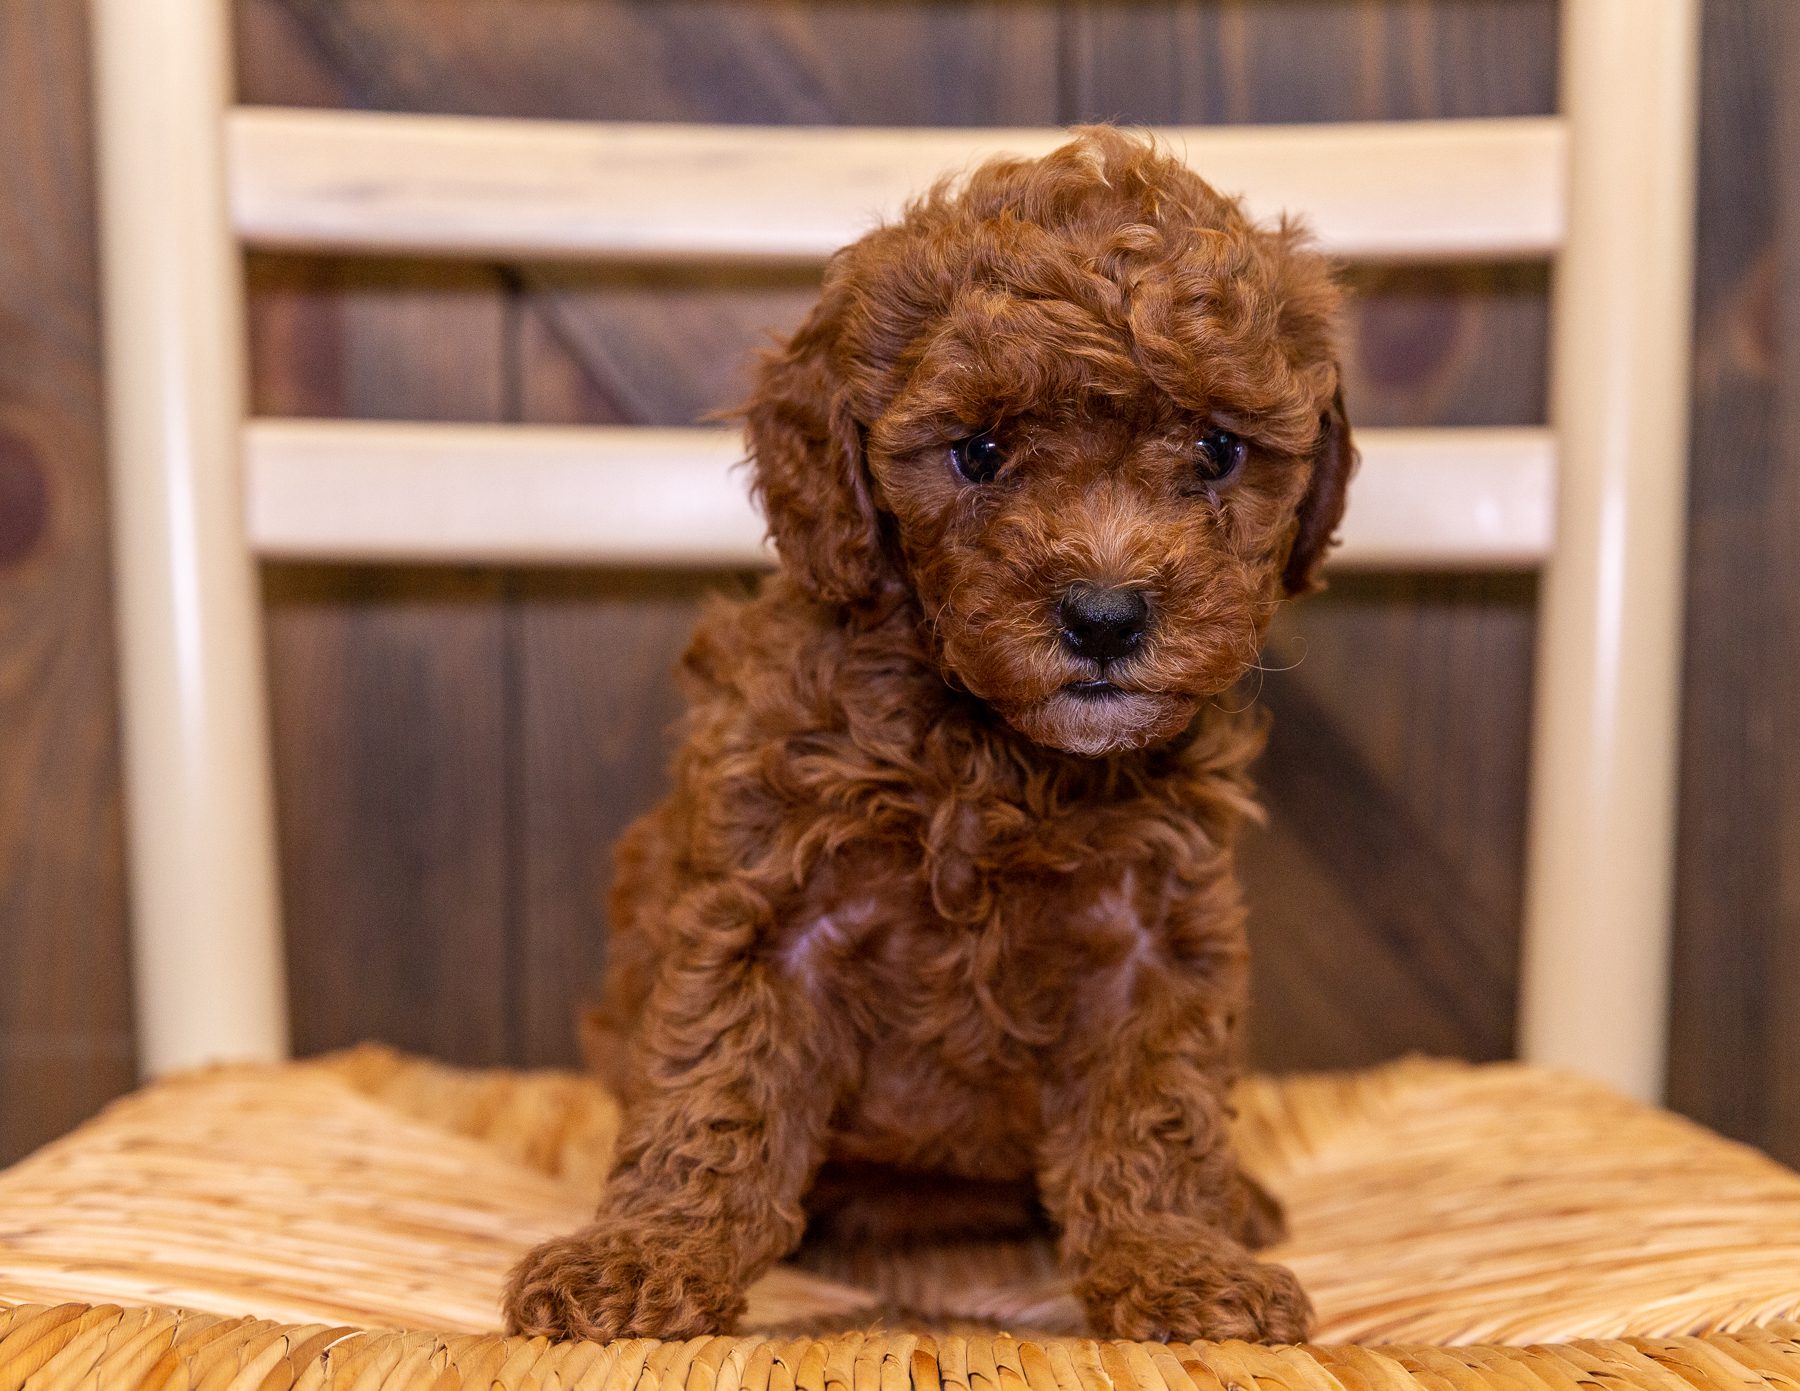 A litter of Petite Cavapoos raised in Iowa by Poodles 2 Doodles